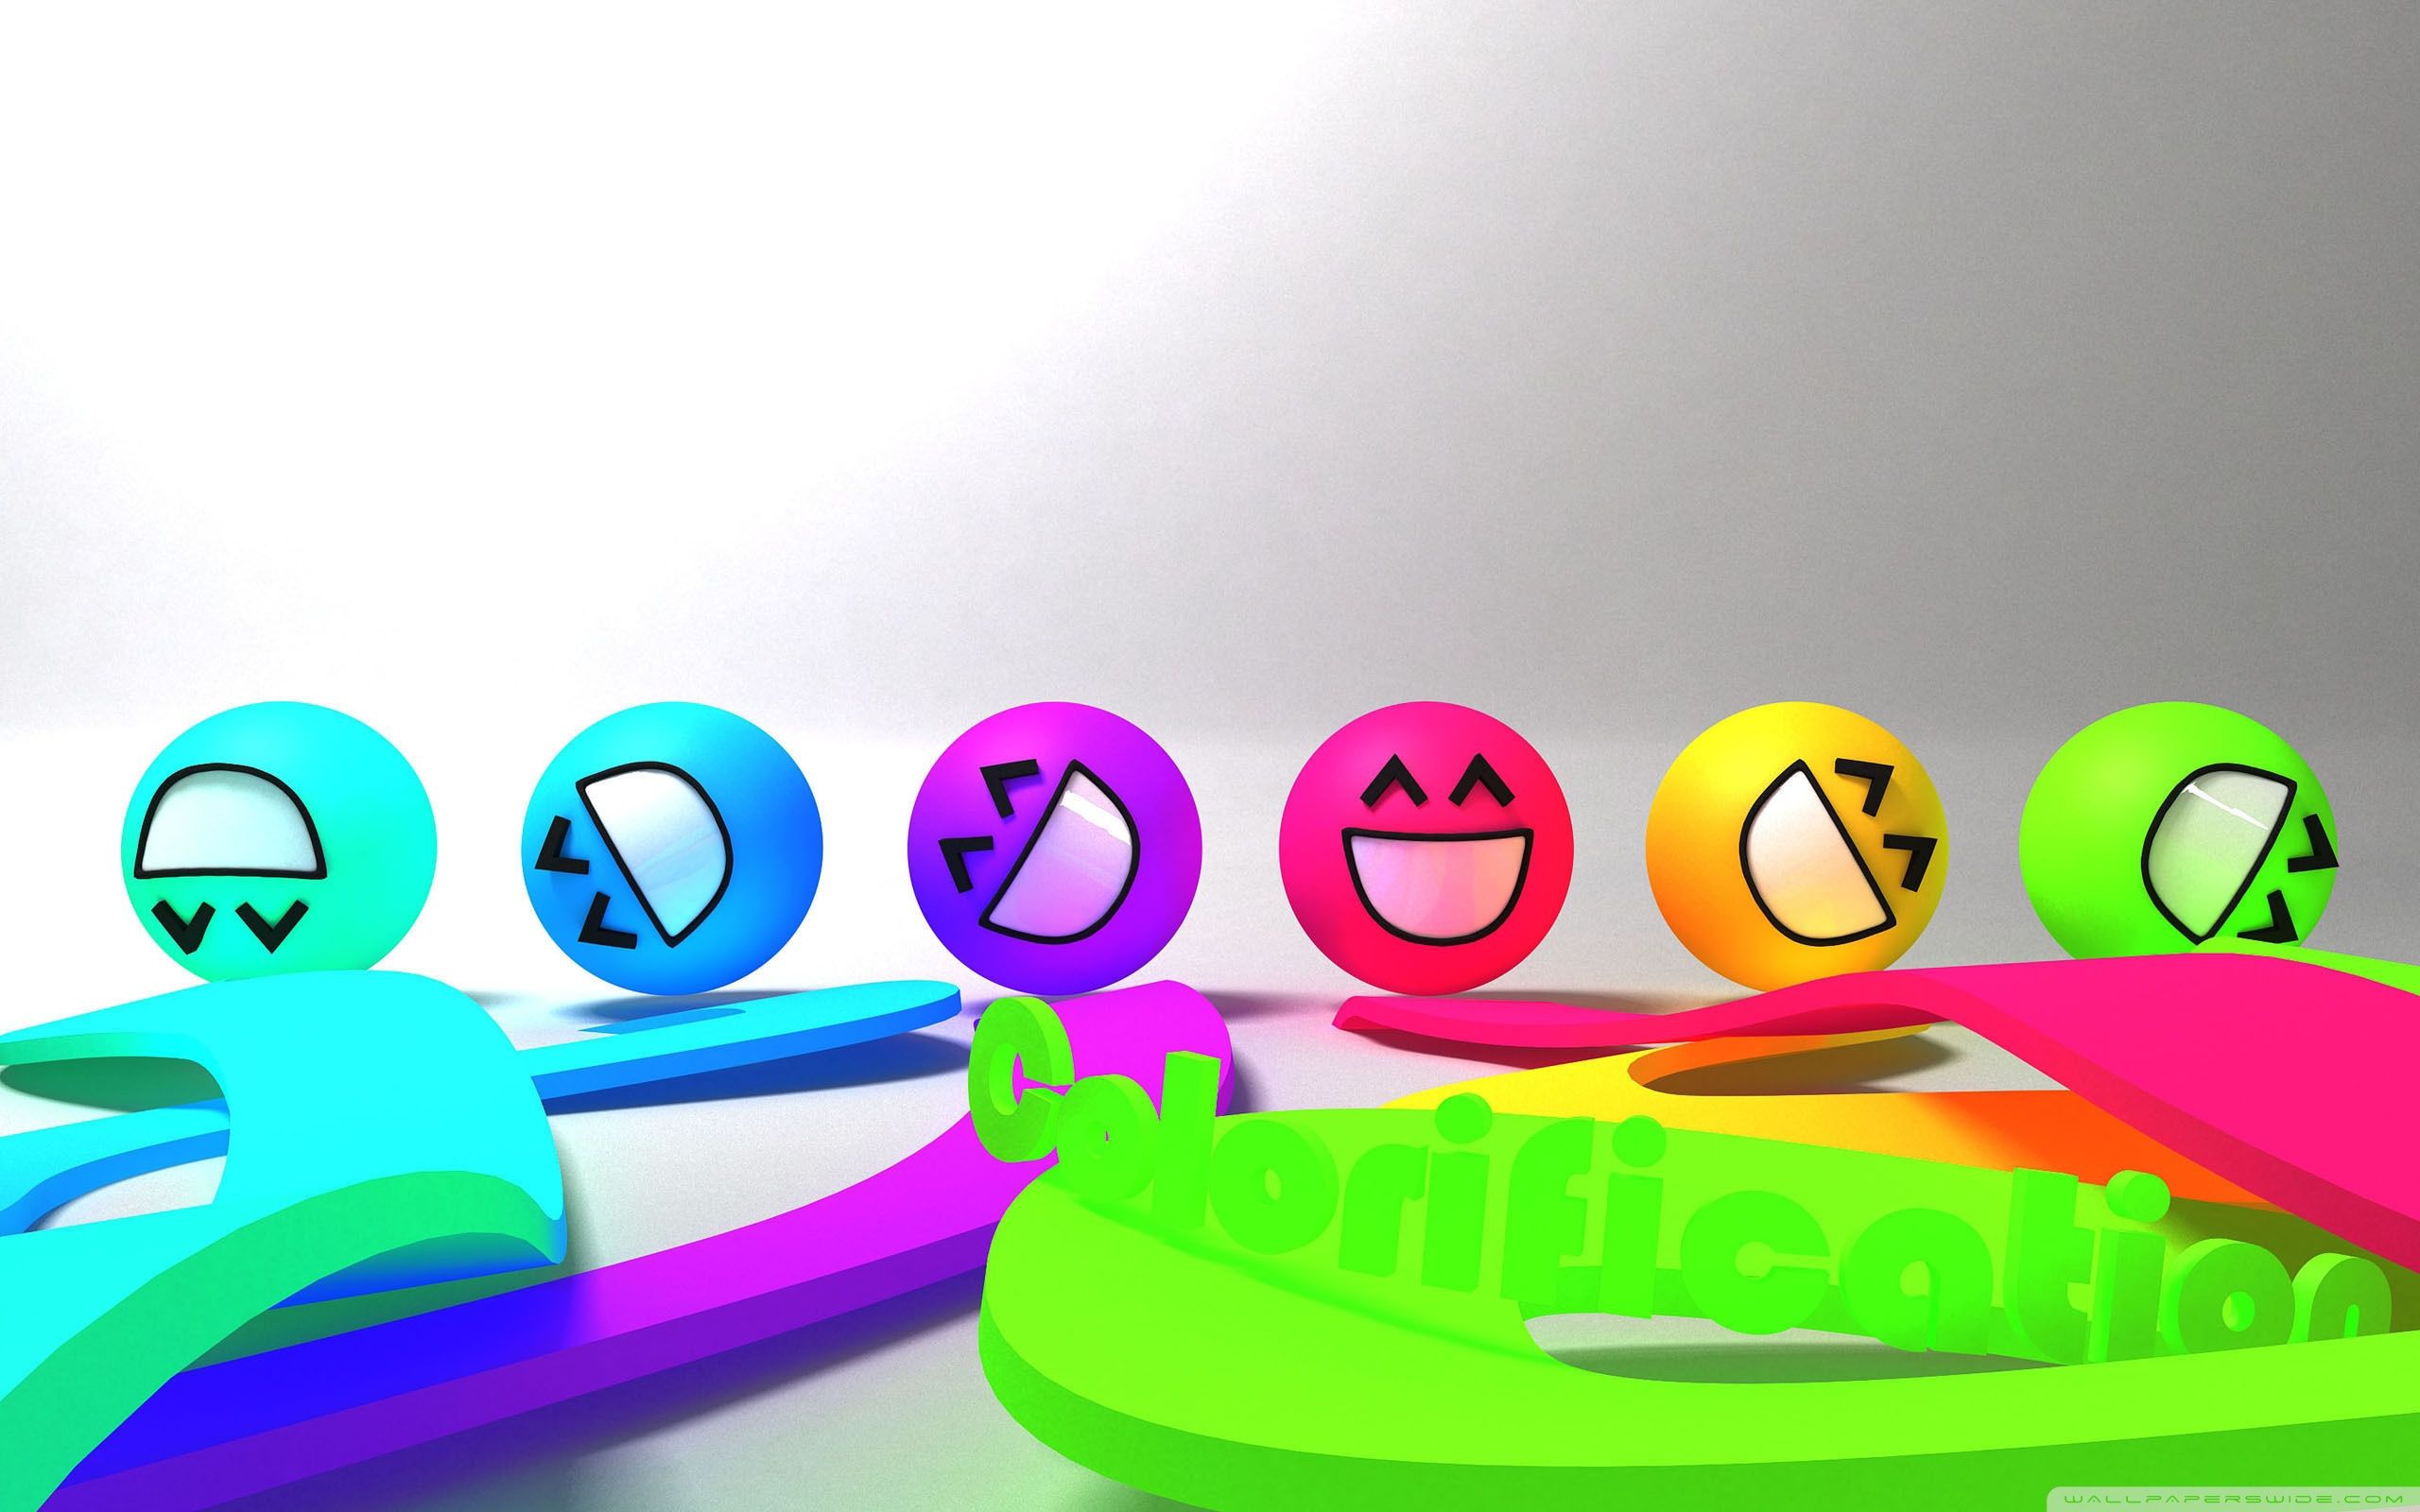 Wallpaper of smiley faces